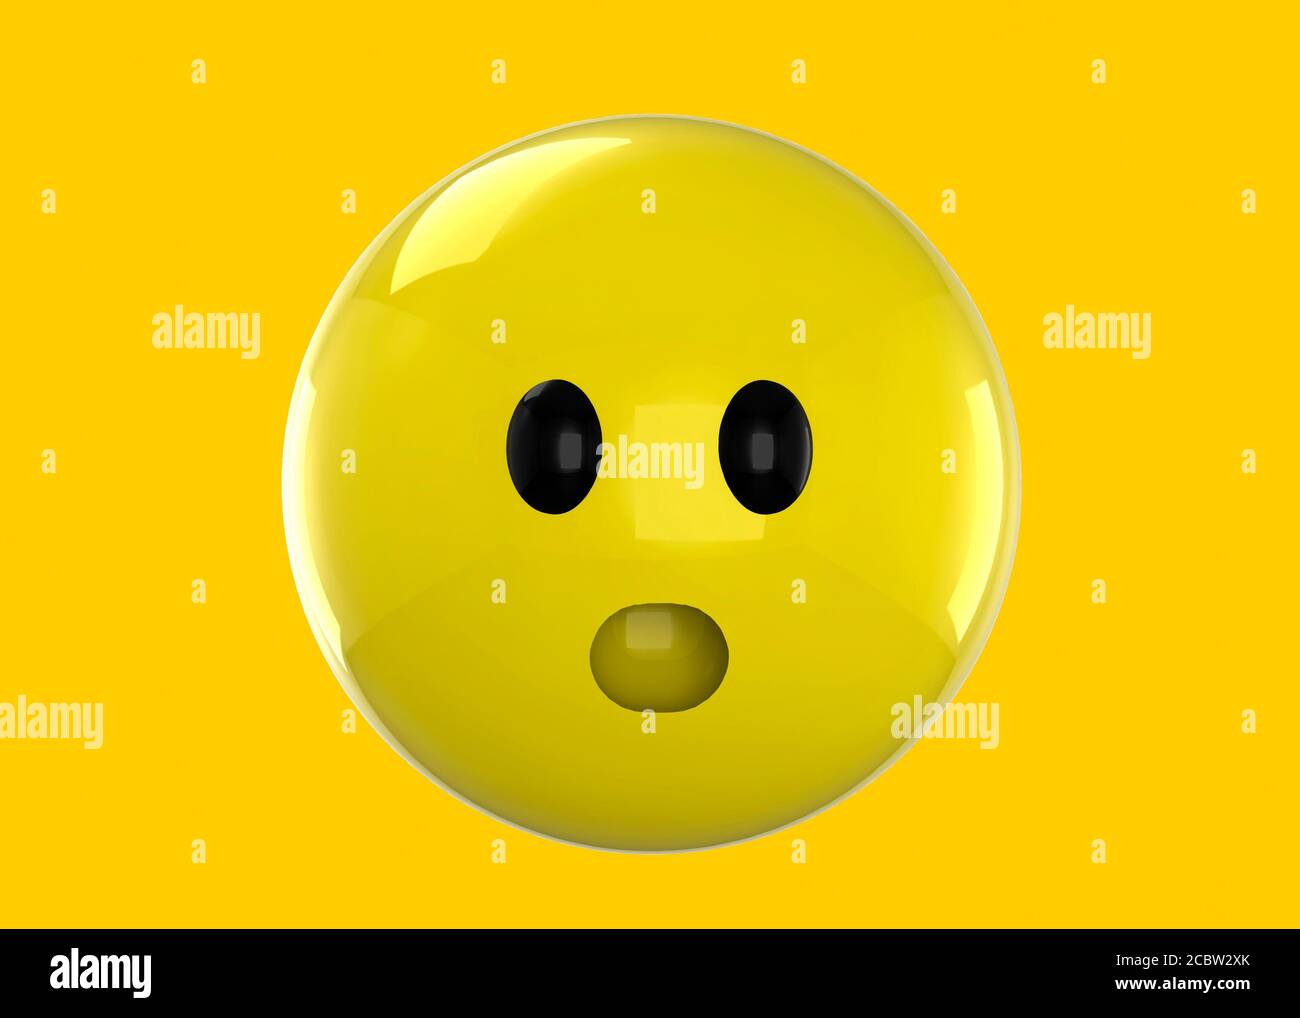 The Stunned Emoticon - 3D Stock Photo